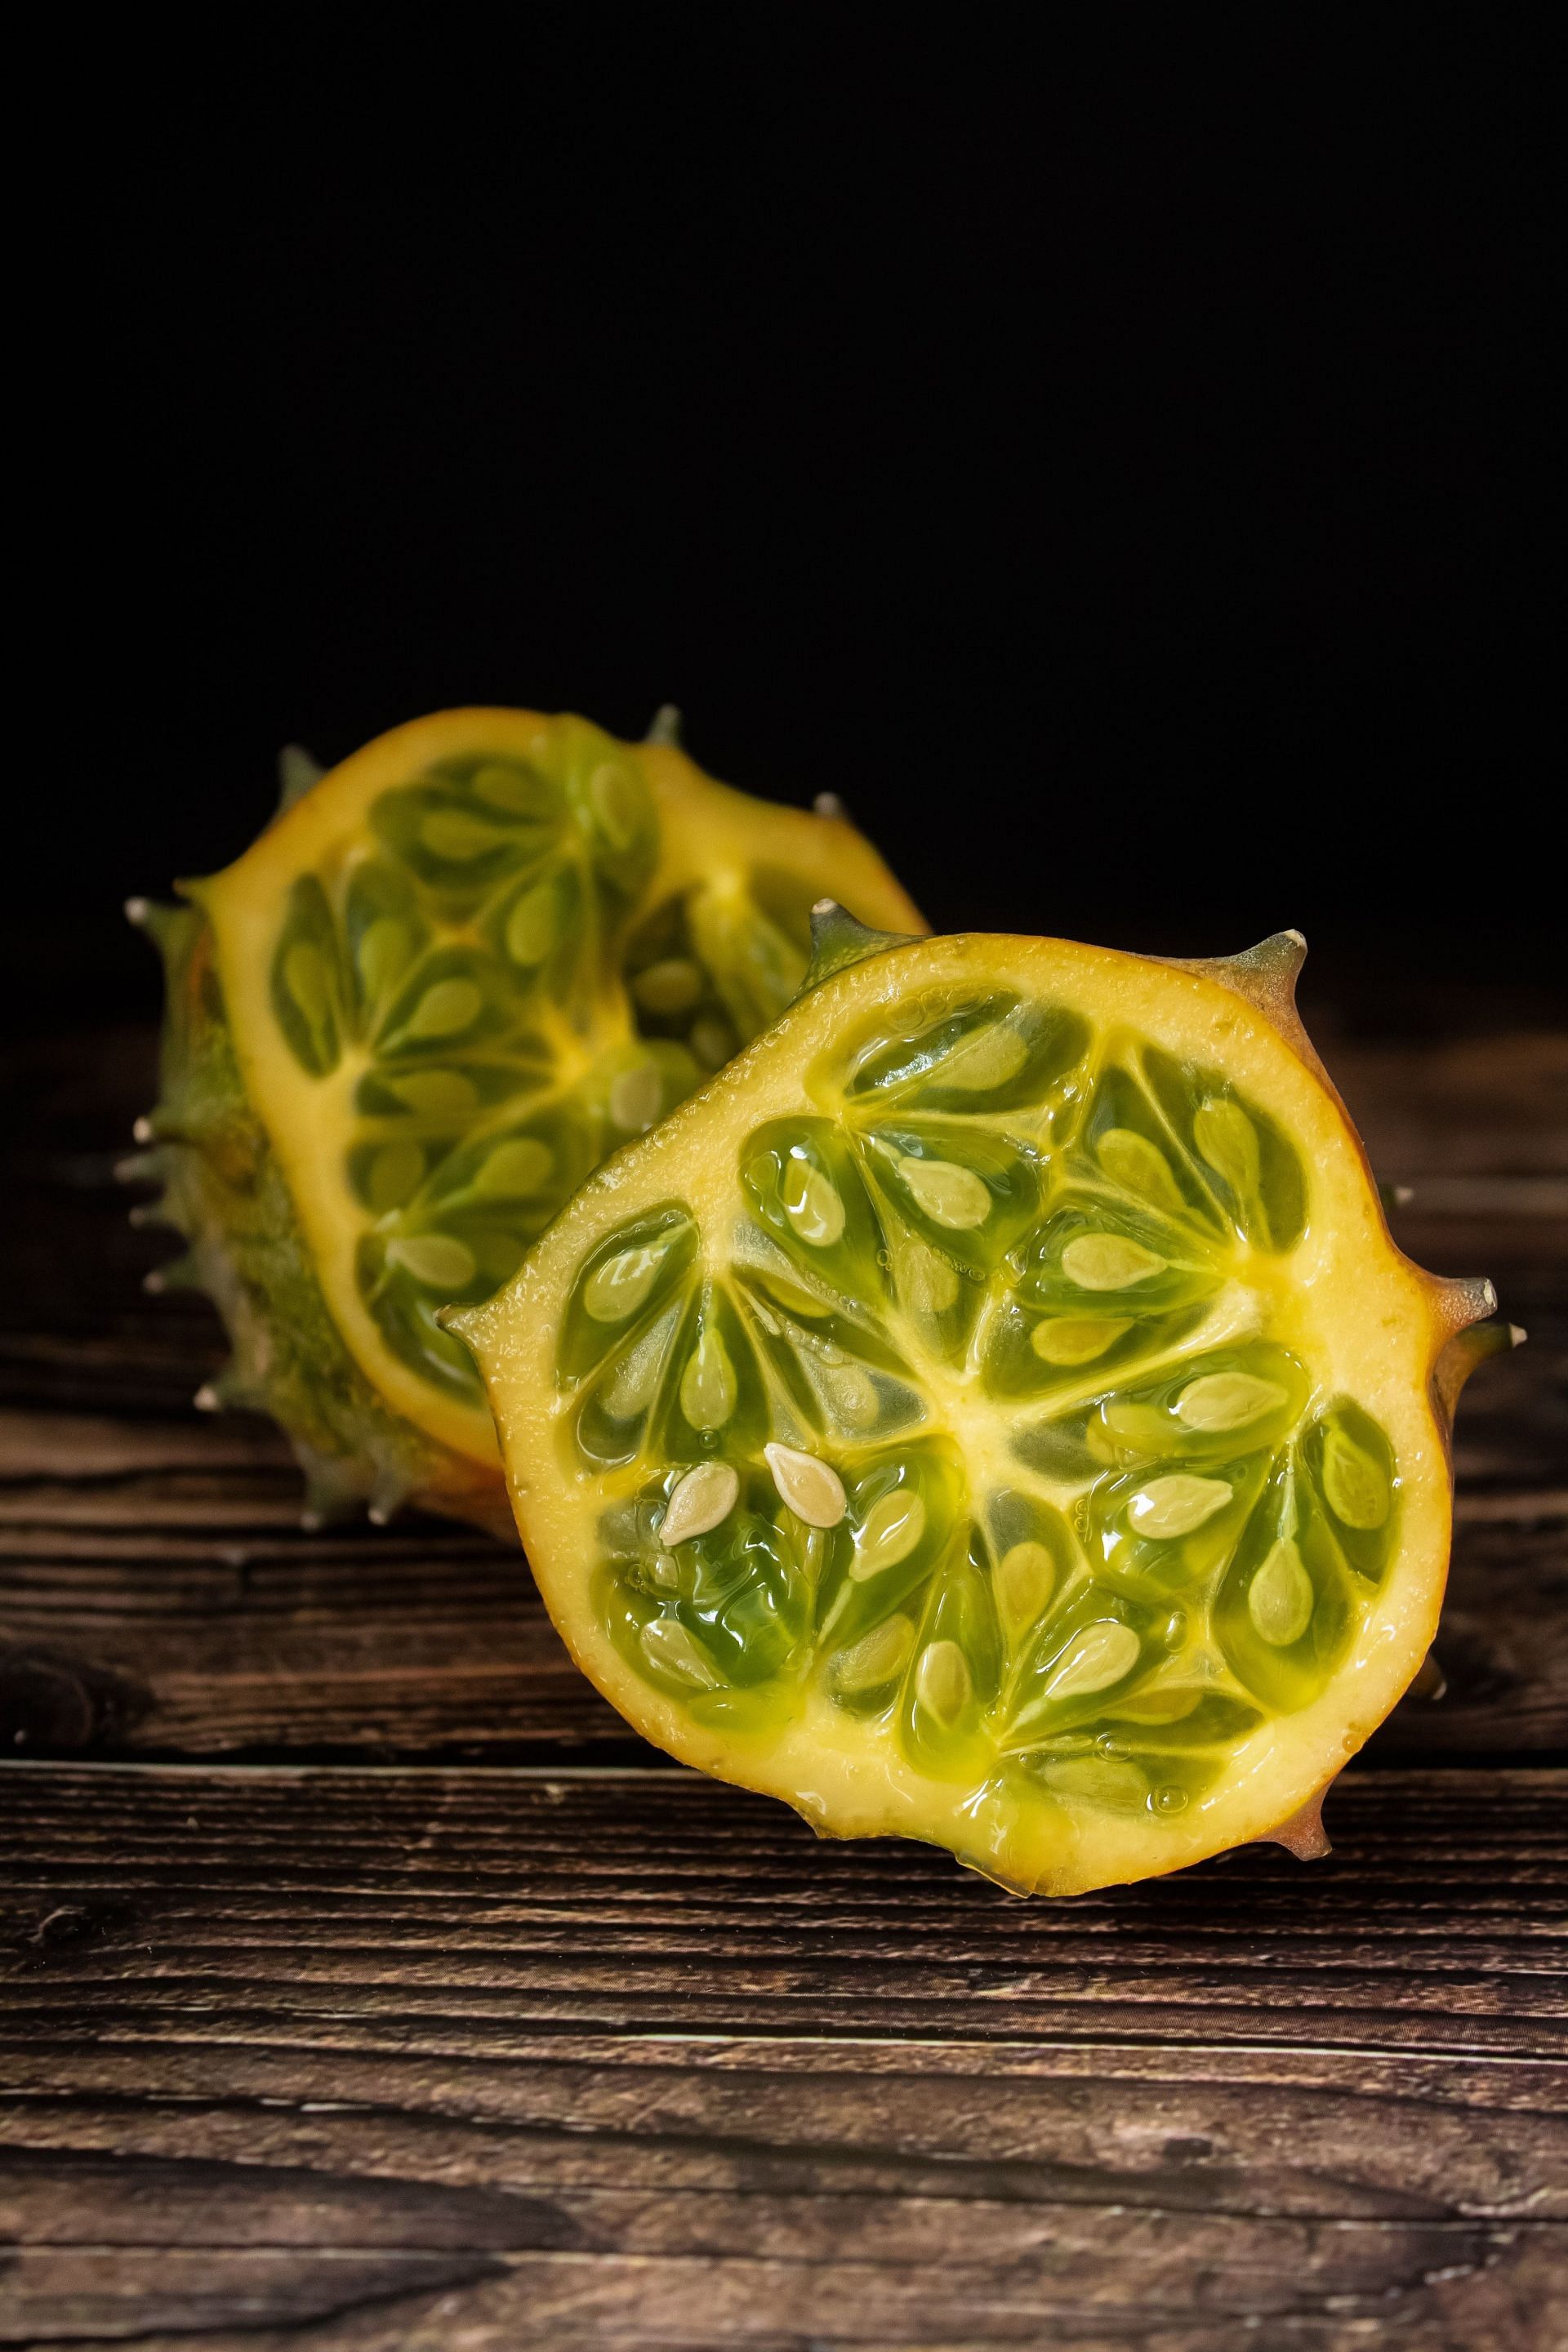 Horned Melon is a hydrating fruit packed with vitamins and minerals. (Image via Pexels)